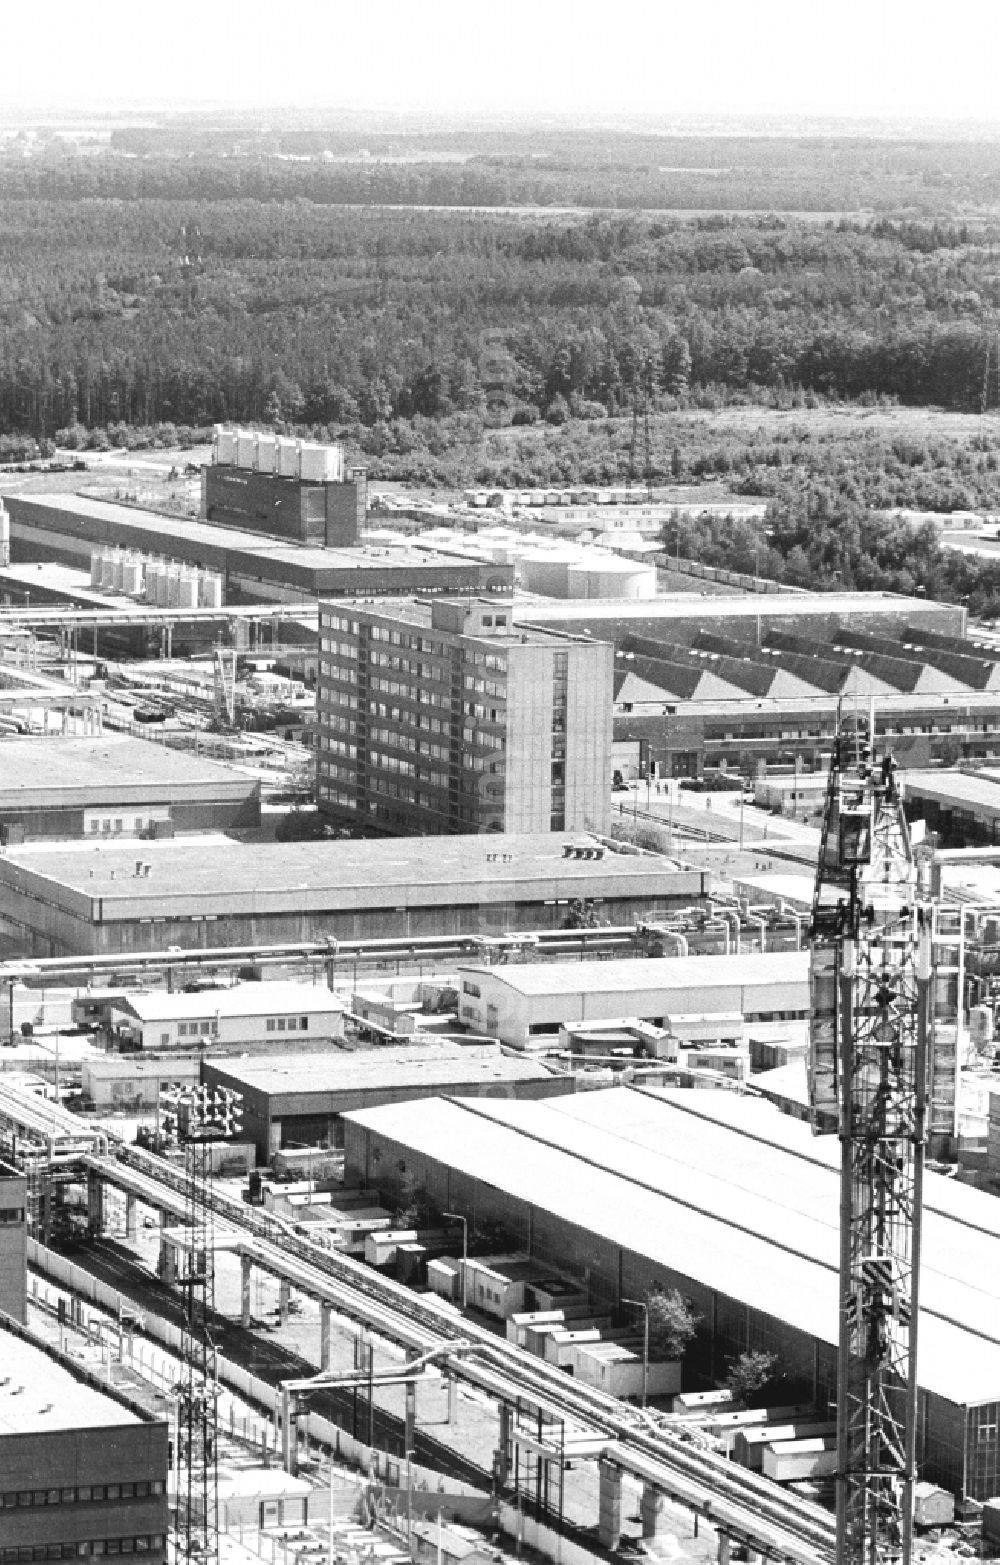 GDR photo archive: Lubmin - Decommissioned nuclear power plant in Lubmin in the state Mecklenburg-Western Pomerania on the territory of the former GDR, German Democratic Republic